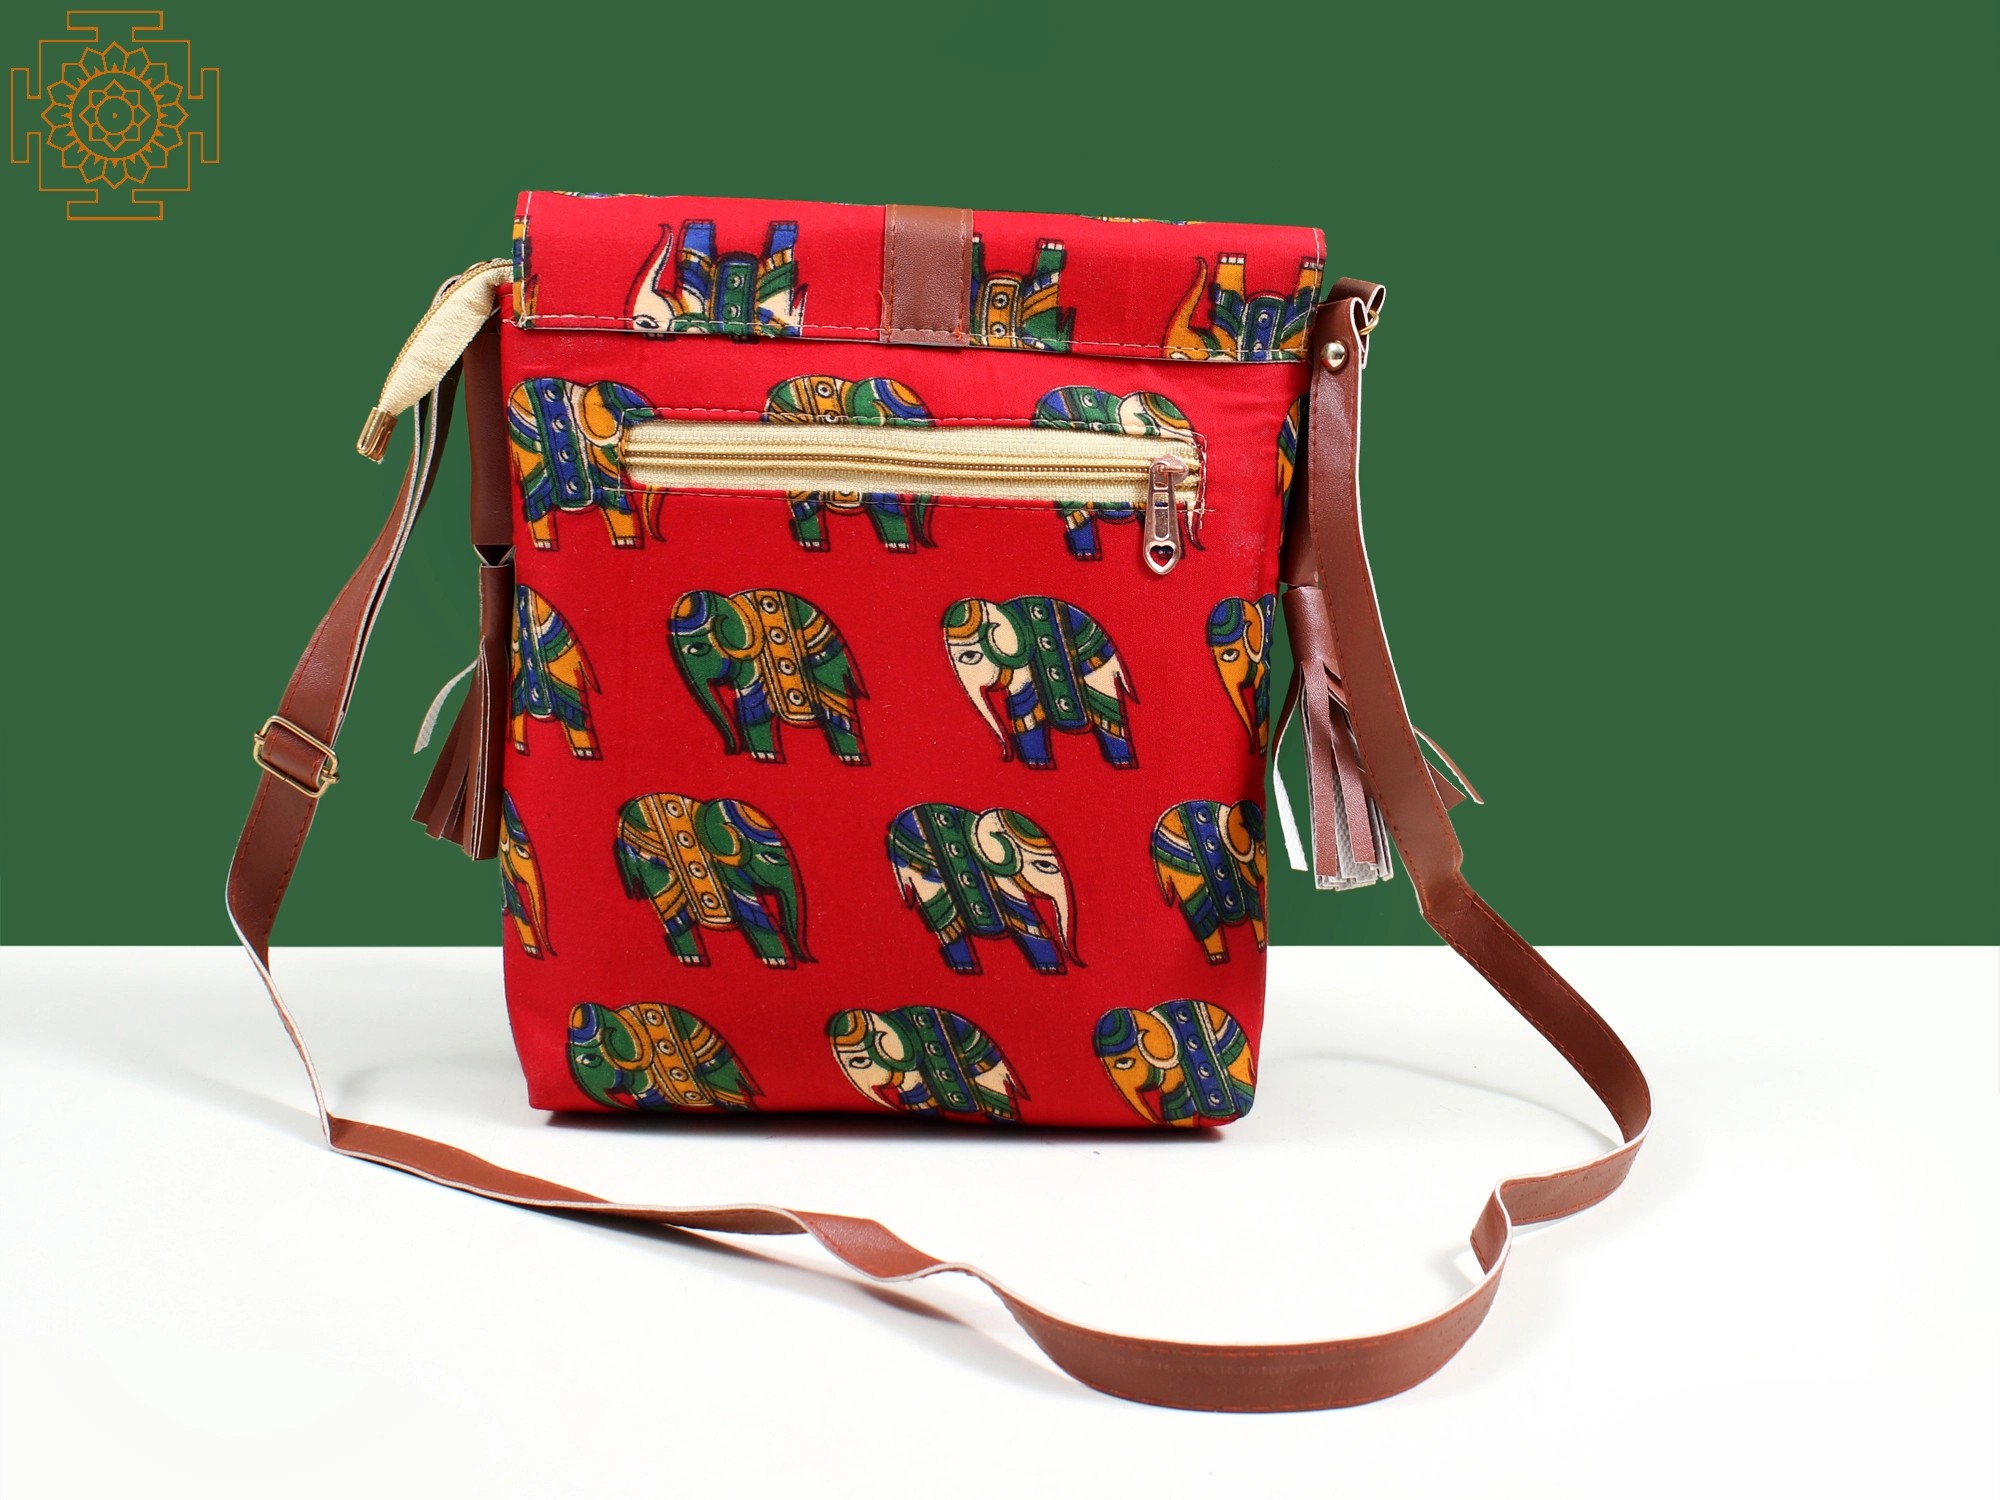 Fabric Bag from Surajkund with Vibrant Elephant Print & Leather-Stud ...